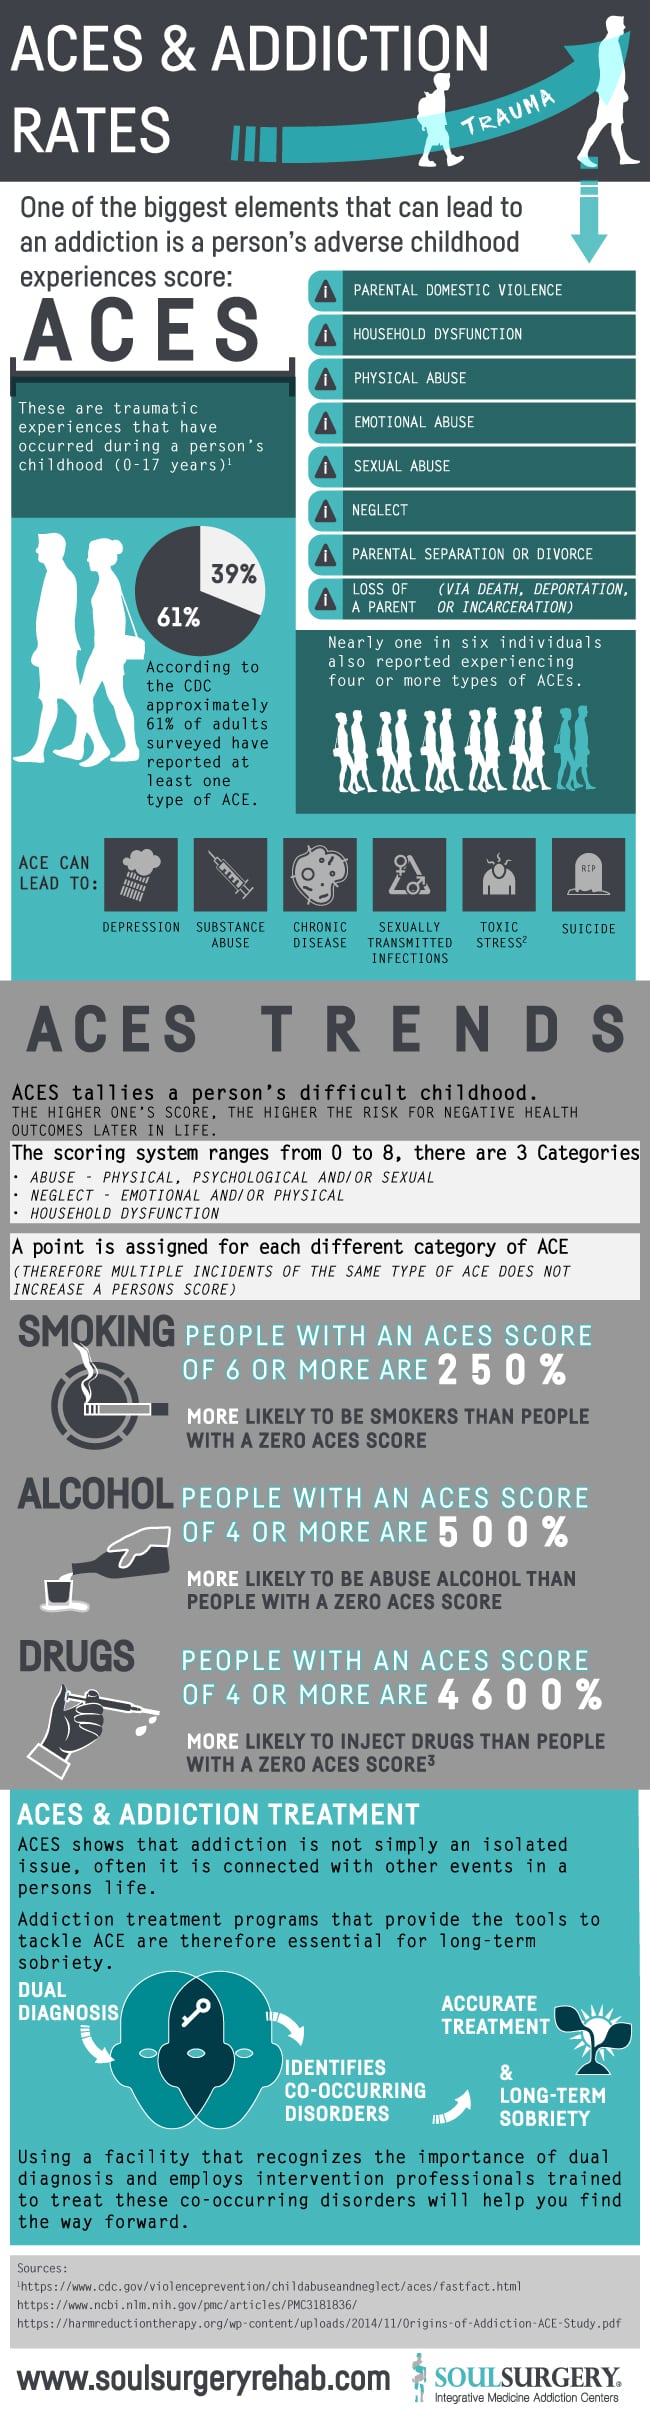 ACES and addiction Rates